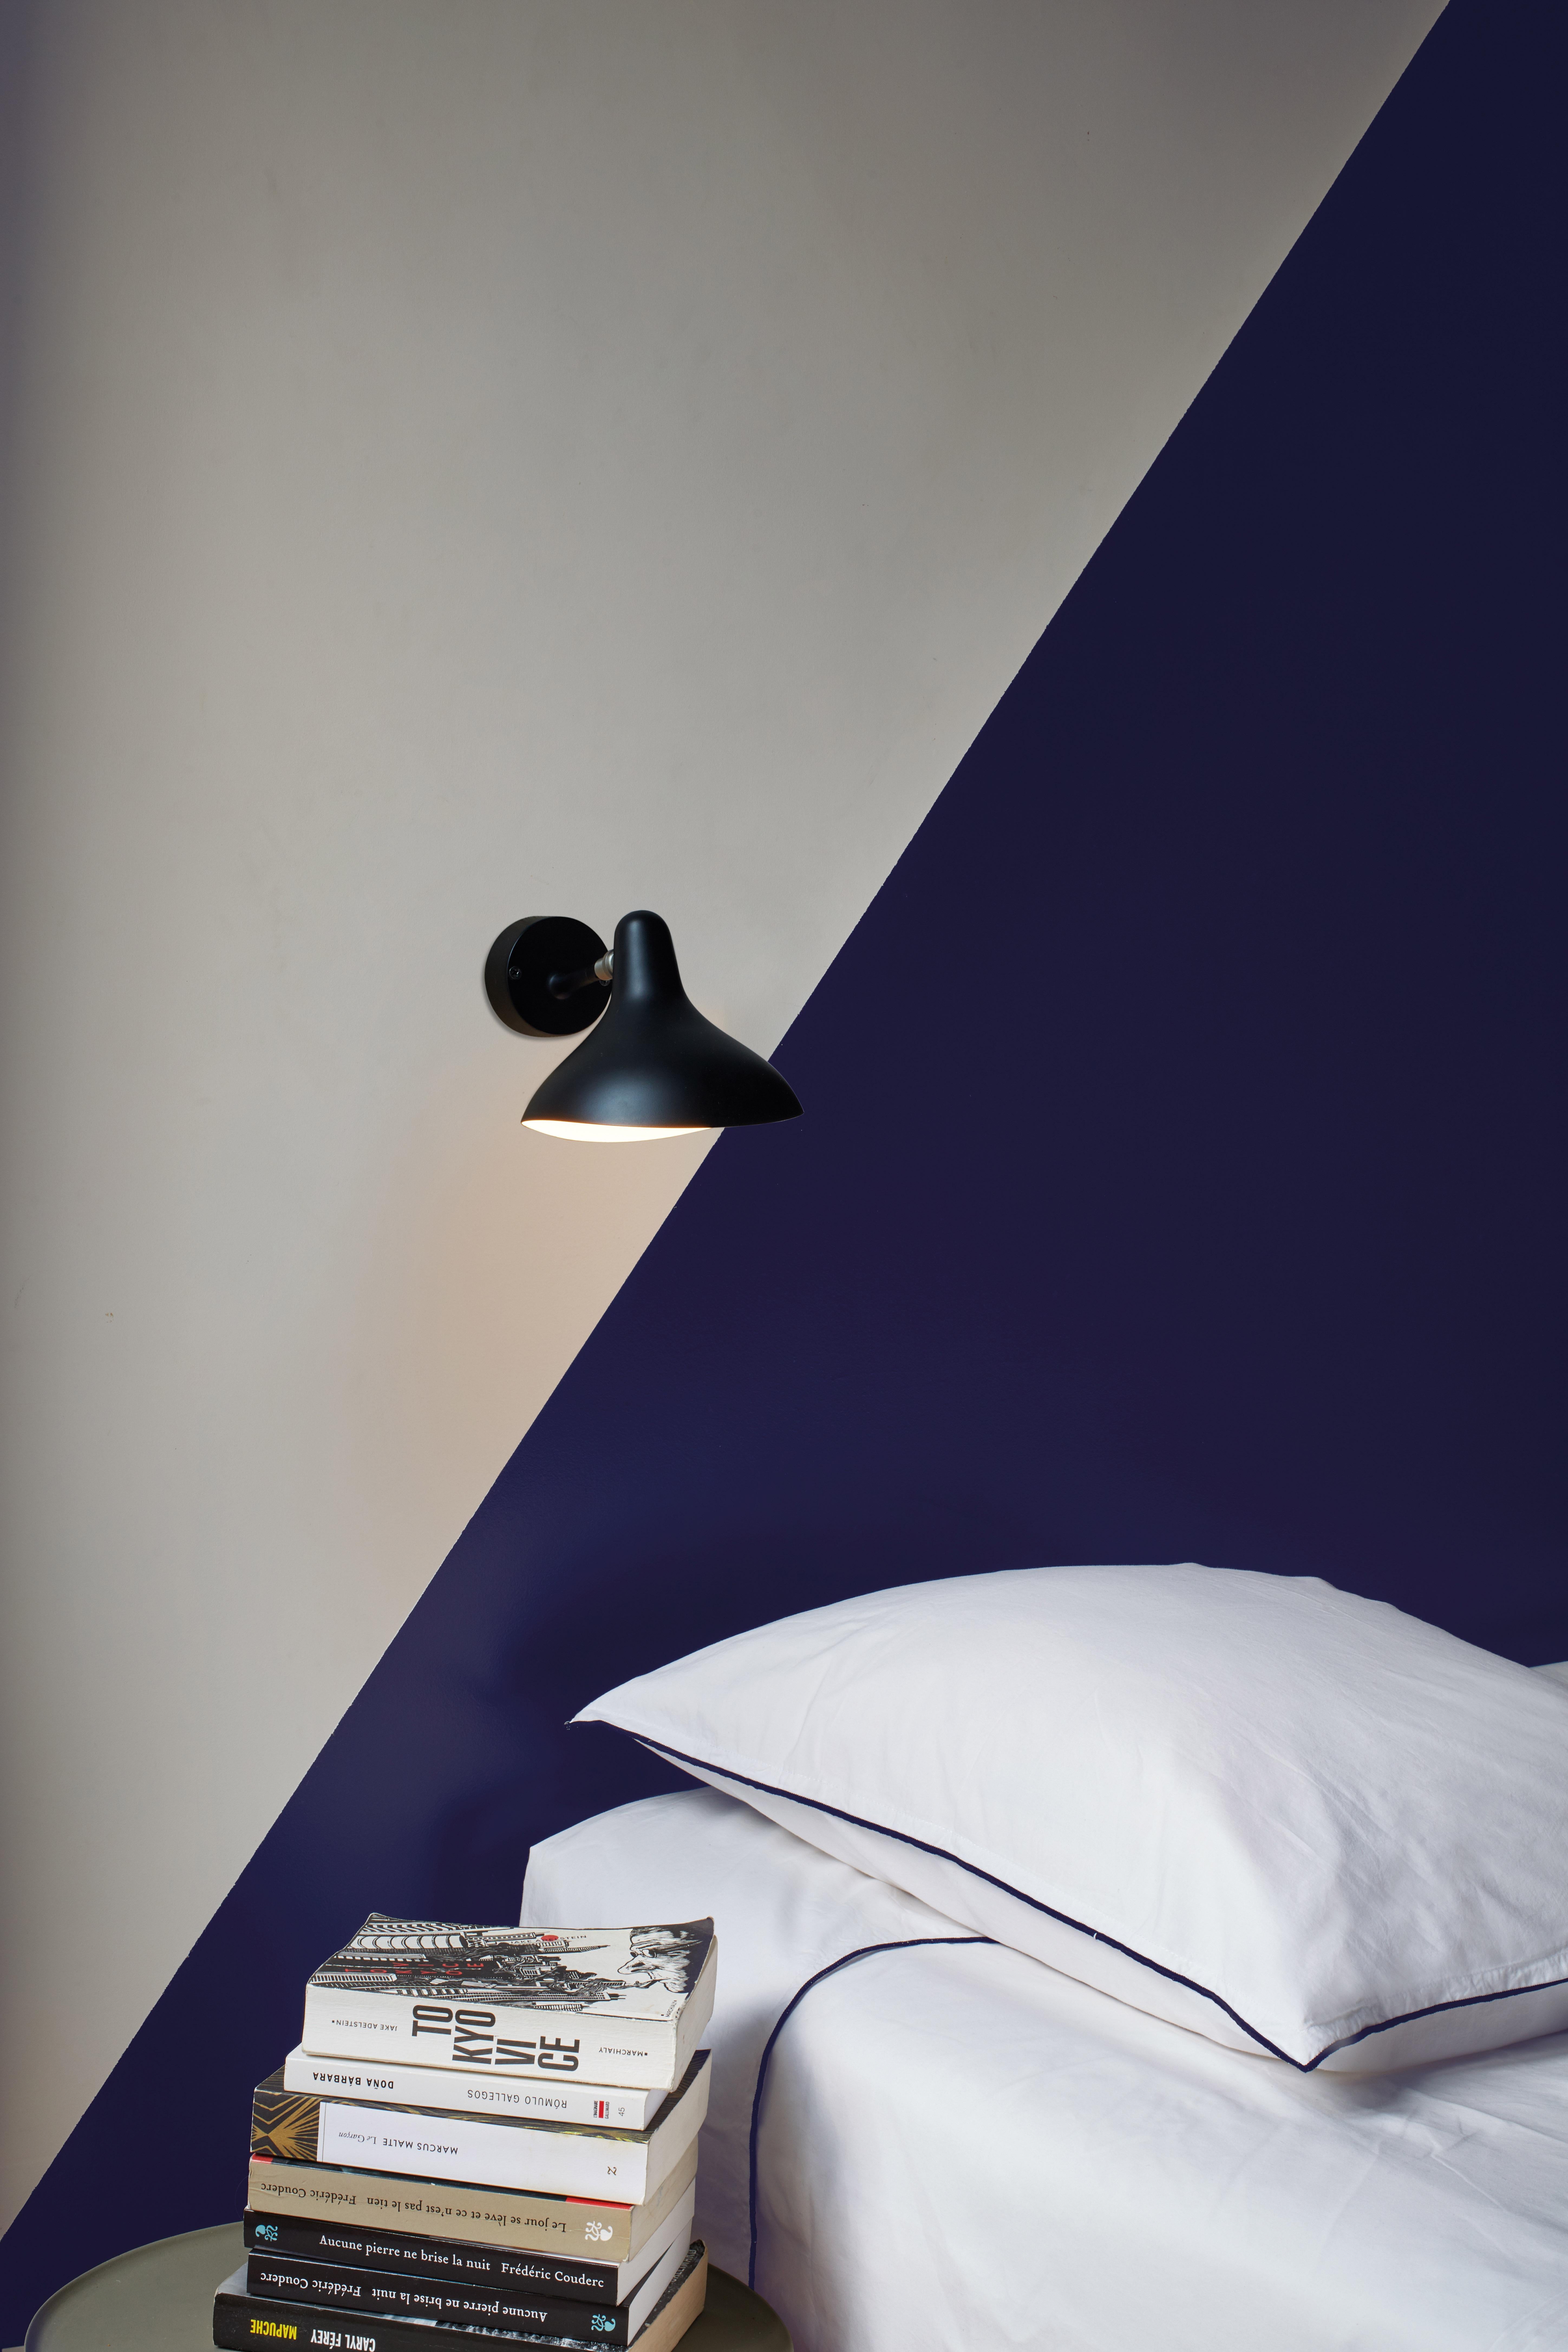 DCW Editions Mantis BS5 Mini Wall Lamp in Black Steel and Aluminum by Bernard Schottlander
 
 The tiny version of the BS5, equiped with integrated LED source
 
 Bernard Schottlander was born in Mainz, Germany in 1924 and moved to England in 1939.